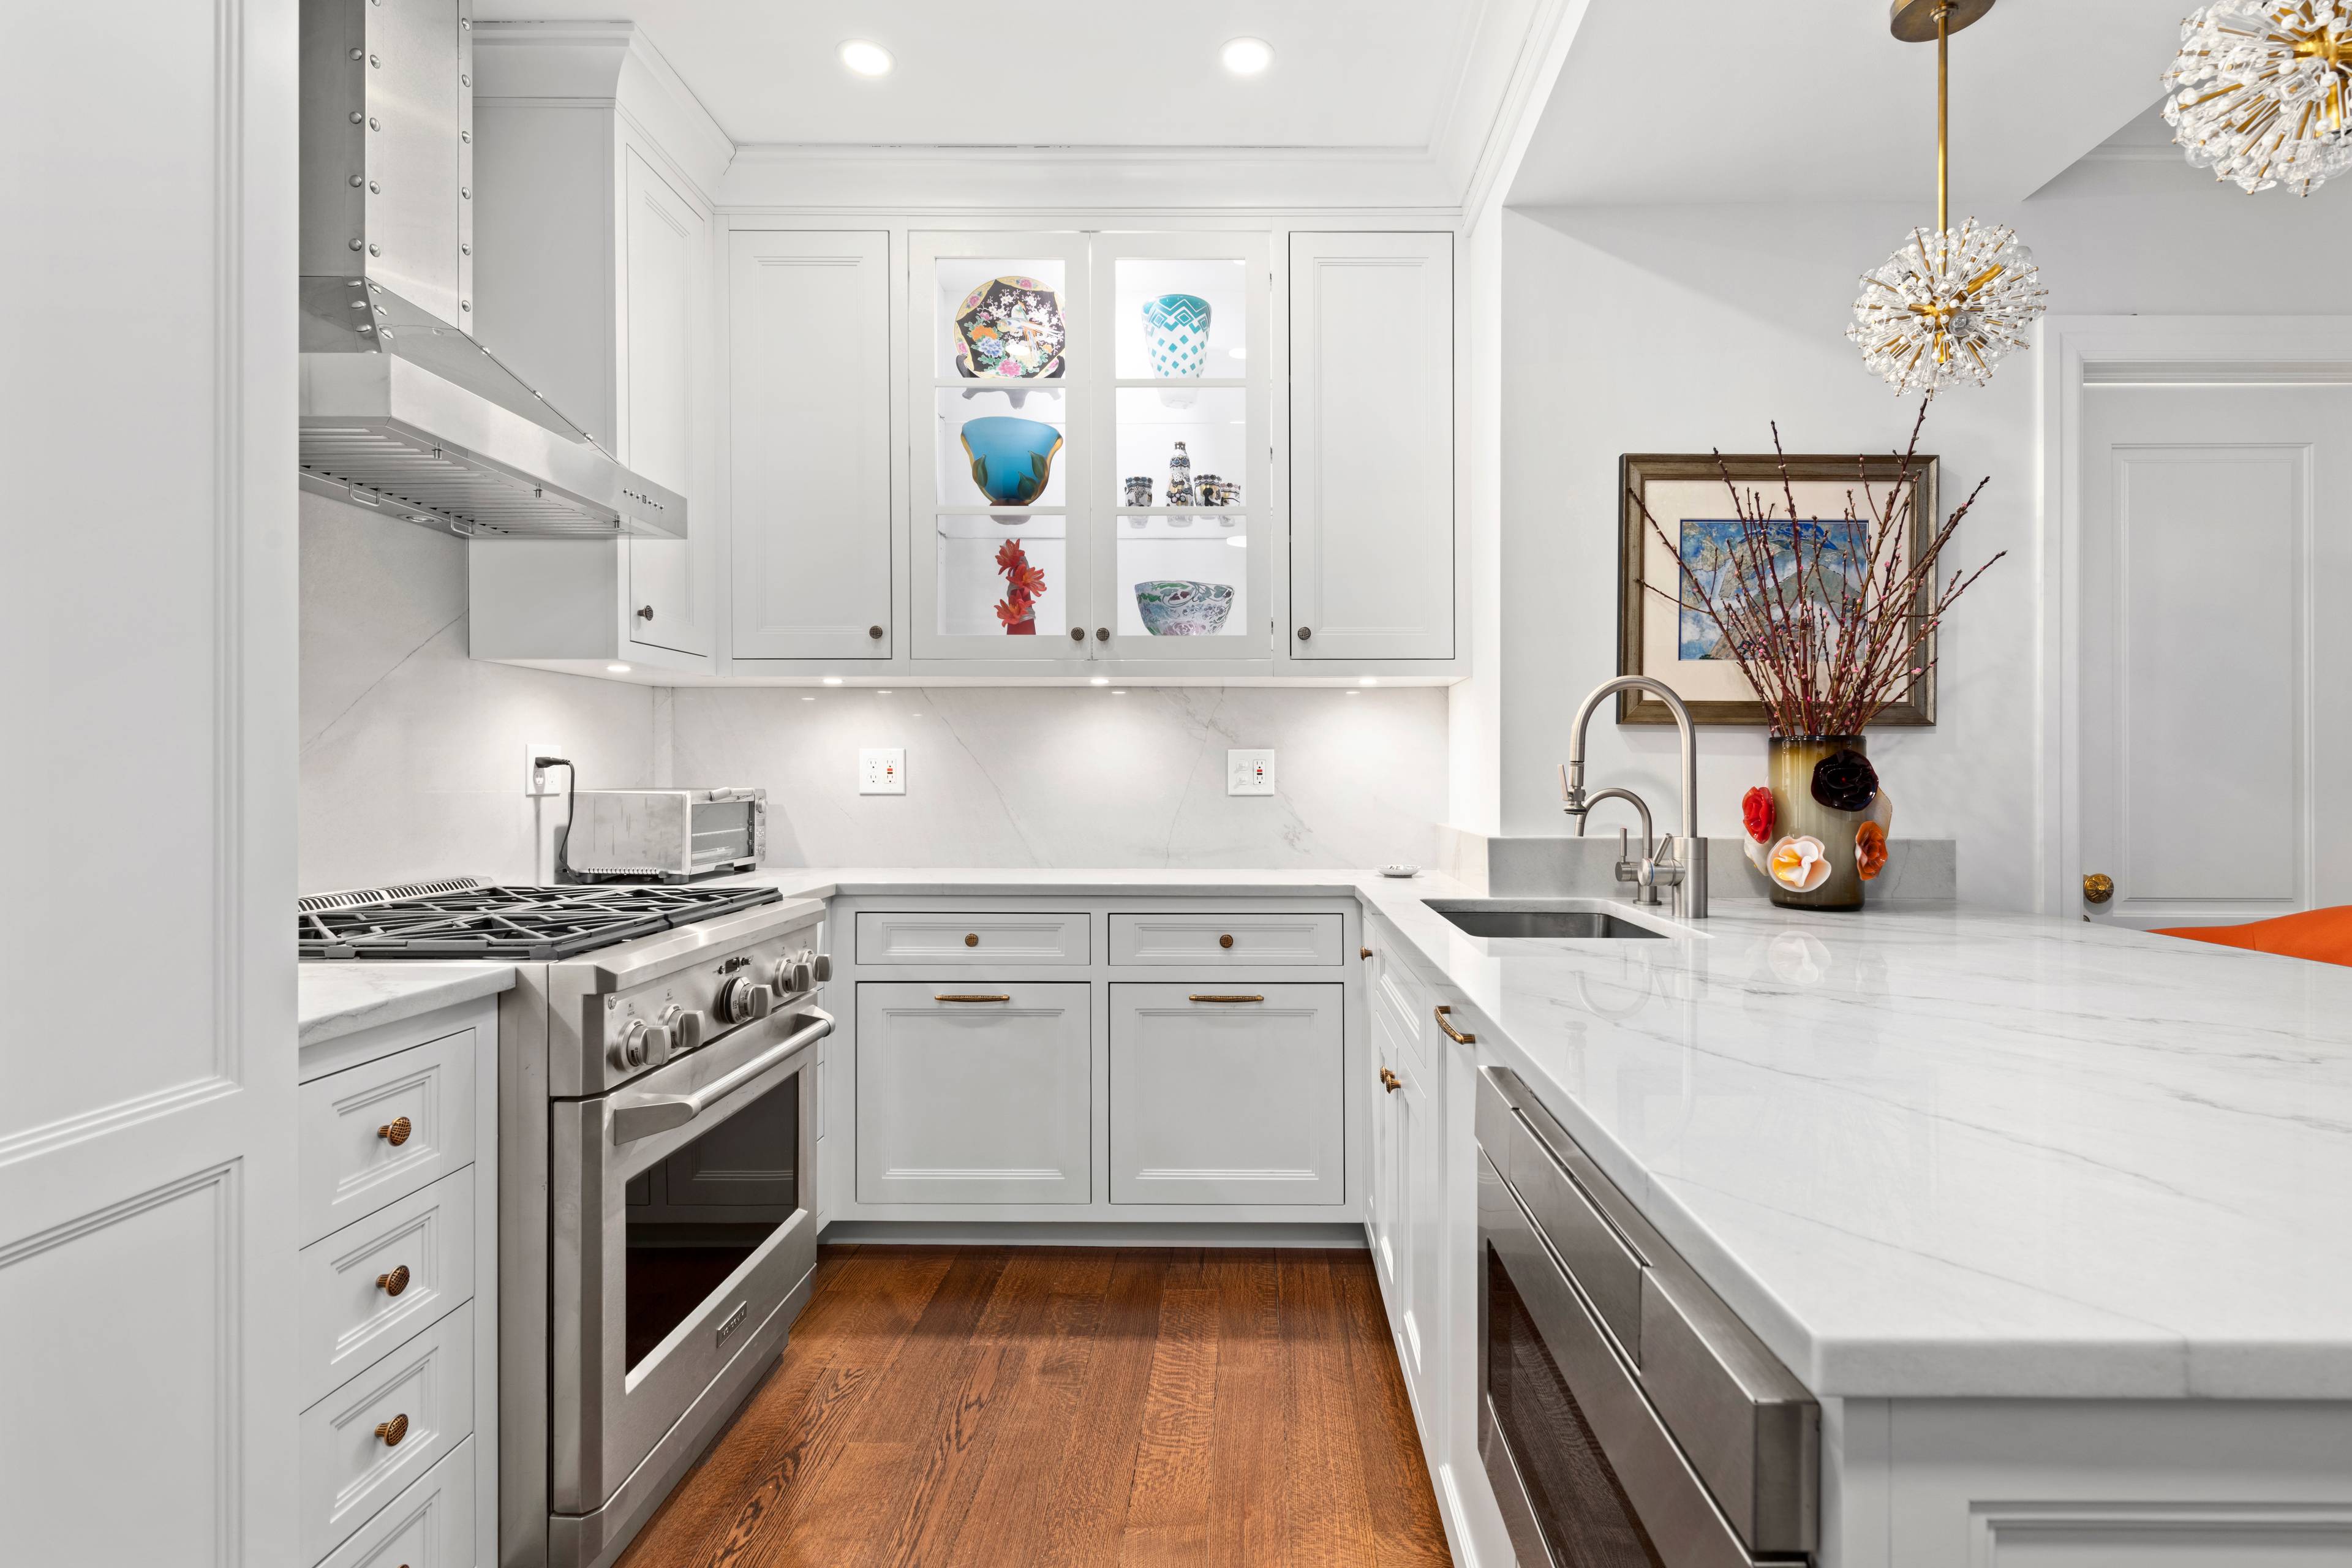 As you enter into this interior designer owned, recently renovated home you will immediately notice the incredibly high end finishes, natural light, and attention to detail.